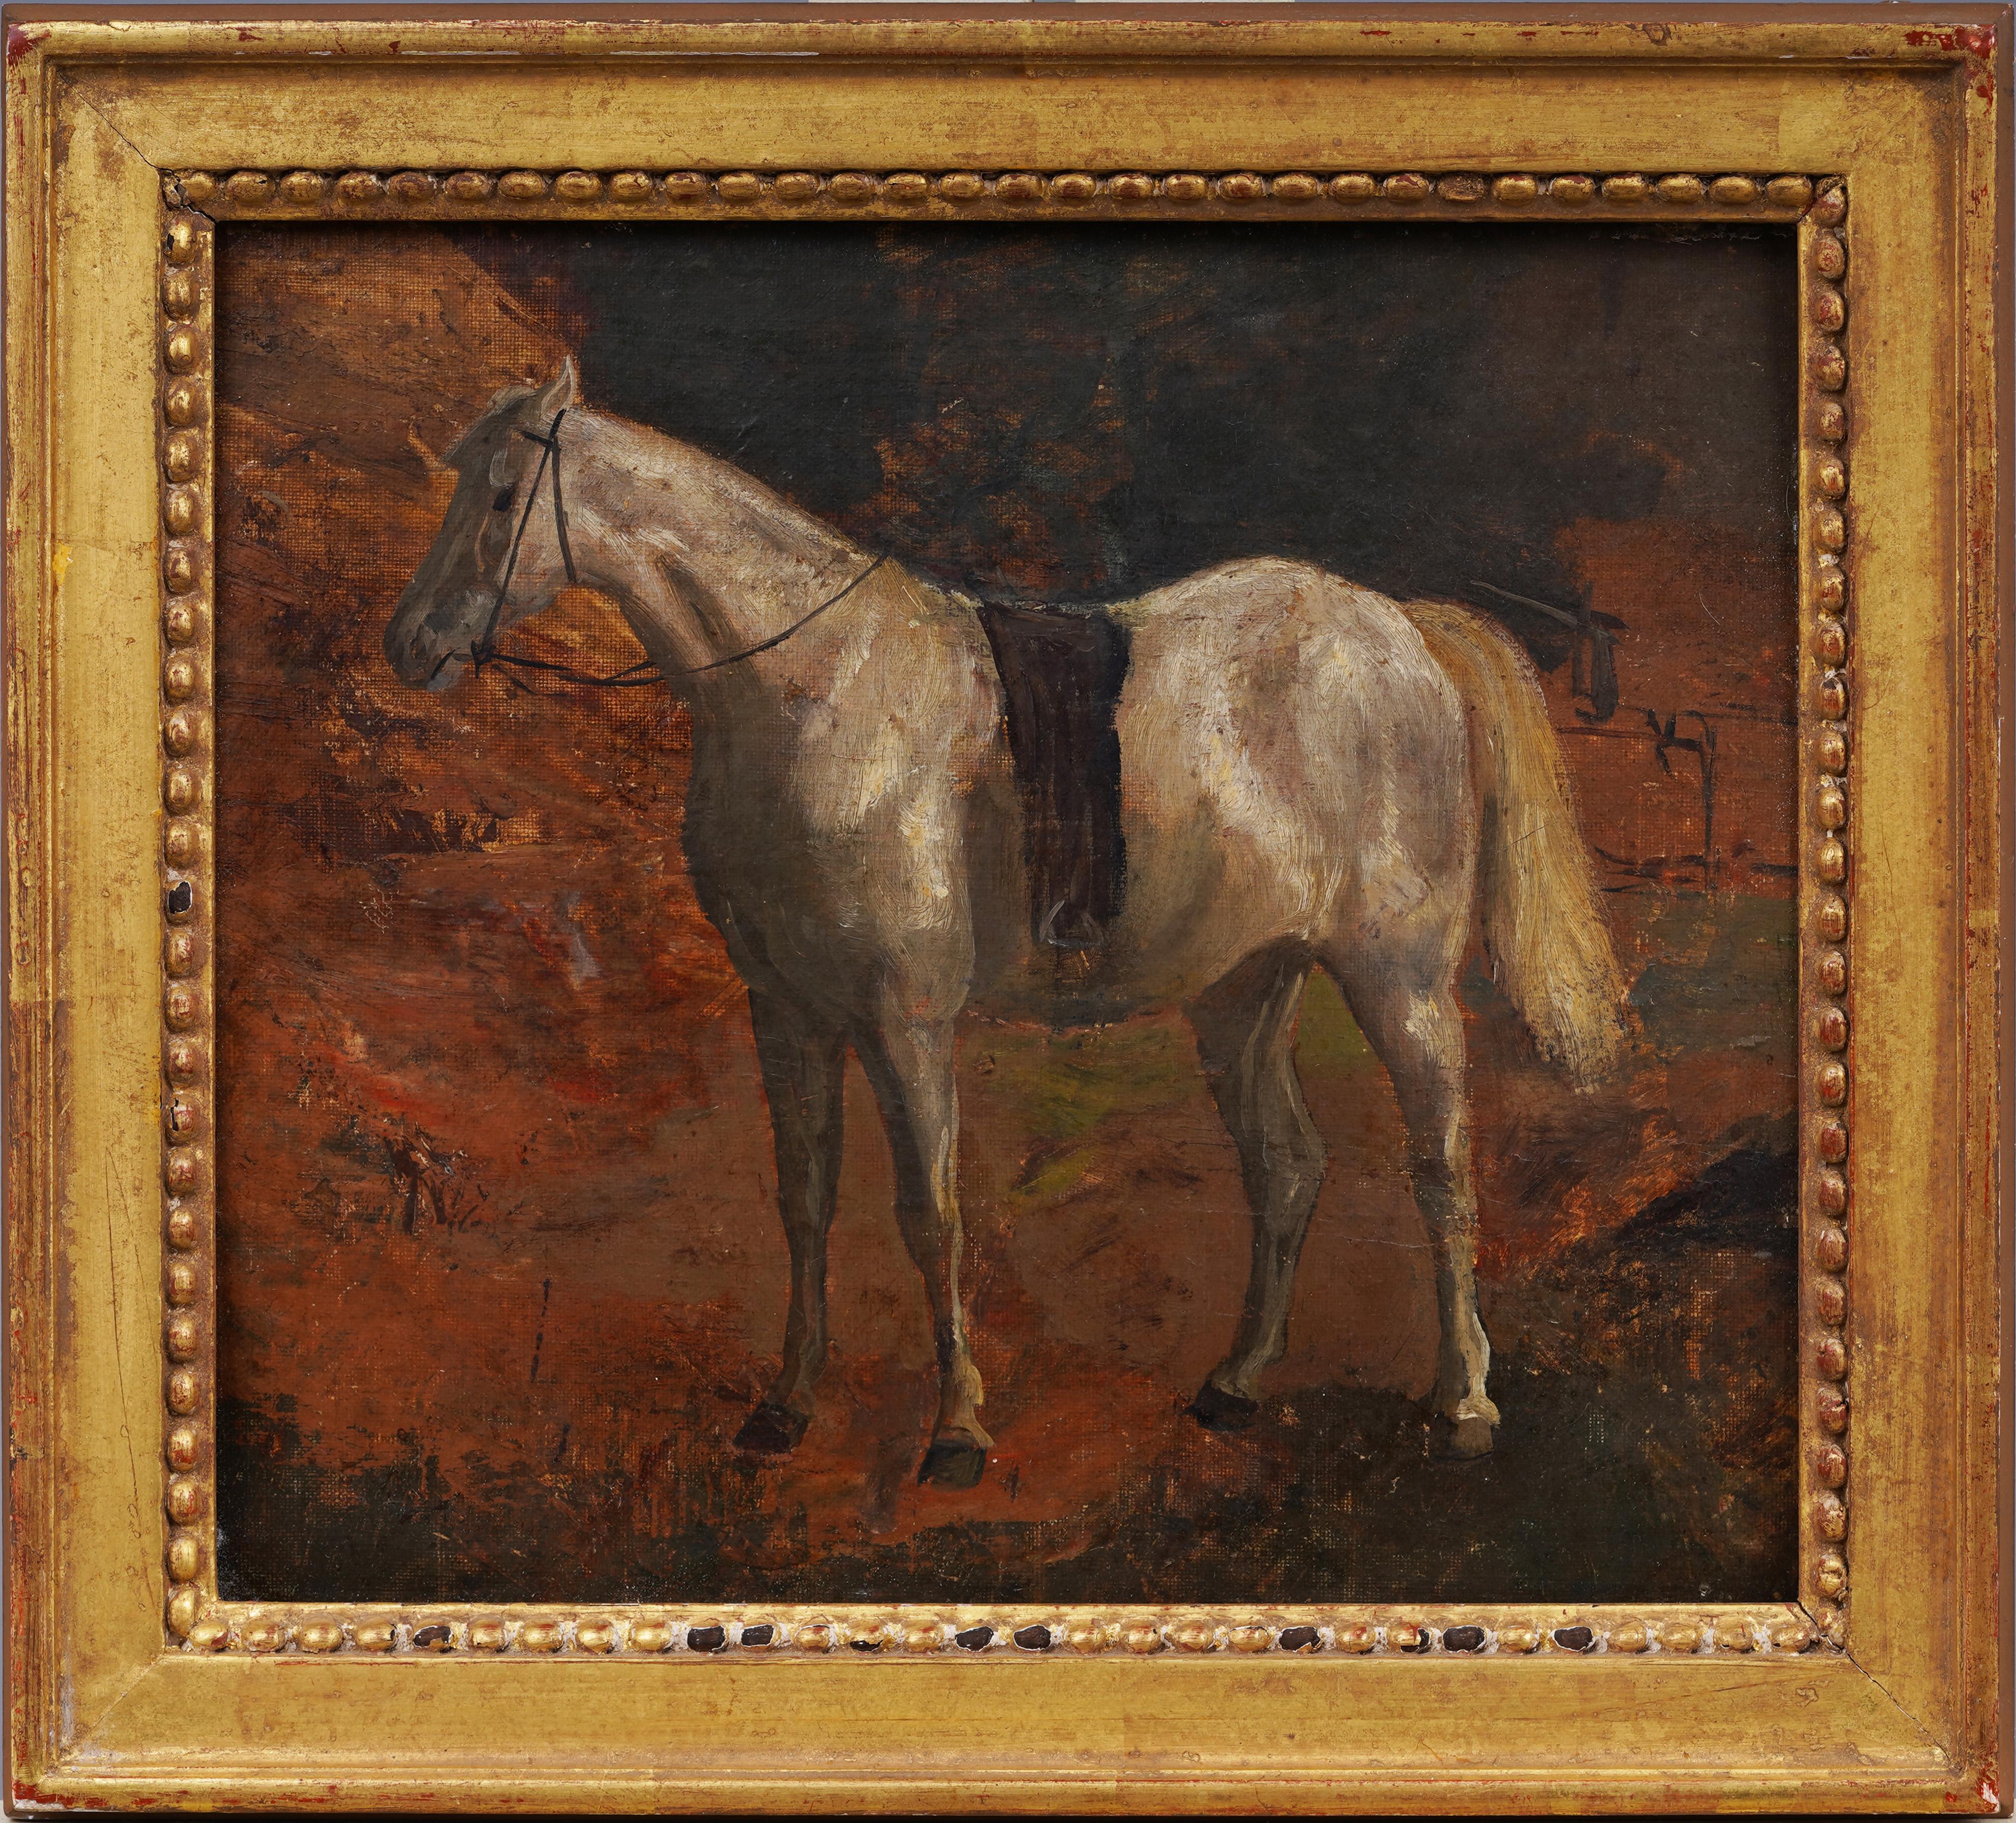 19th century horse portrait in a fall landscape.  Oil on board.  Nicely framed.  